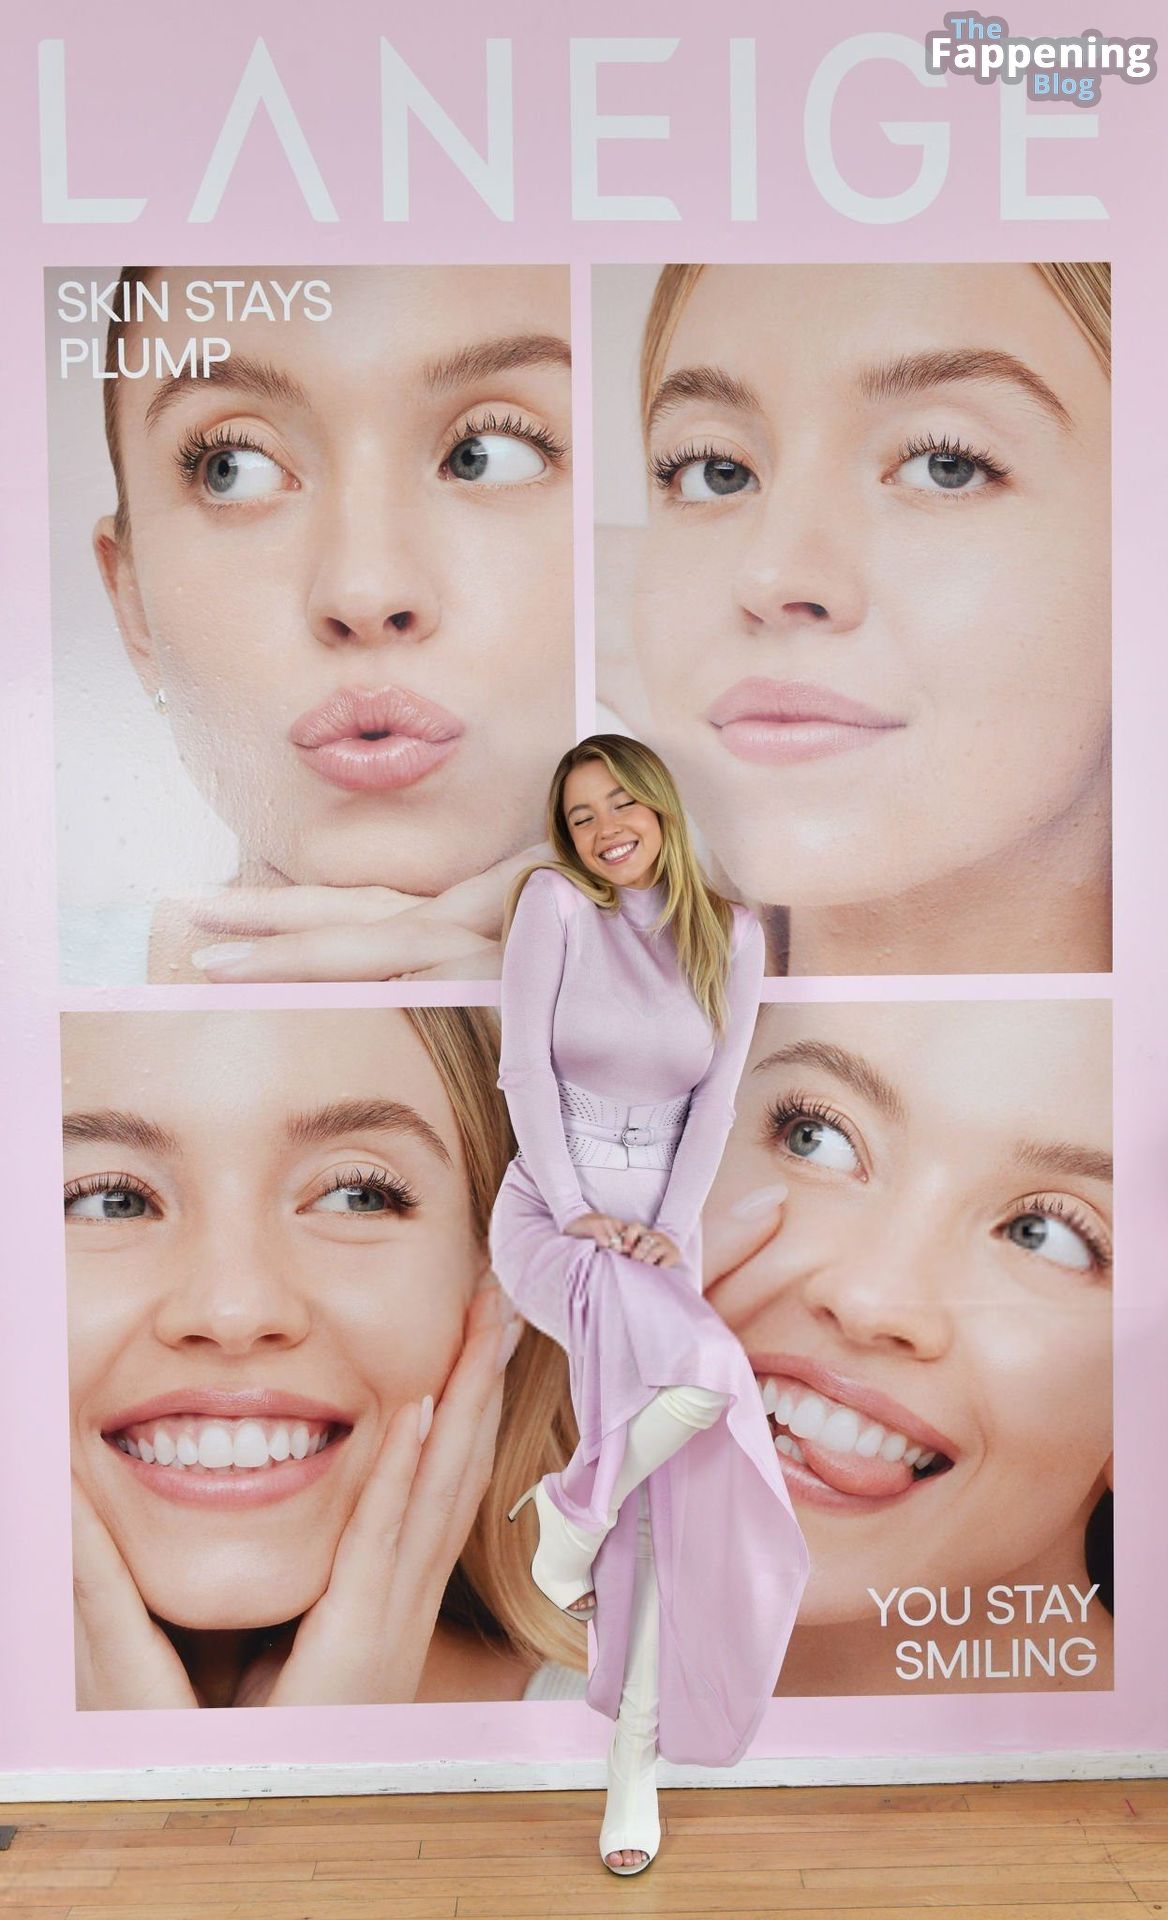 Sydney Sweeney Looks Pretty at the Laneige Launch Event (15 Photos)